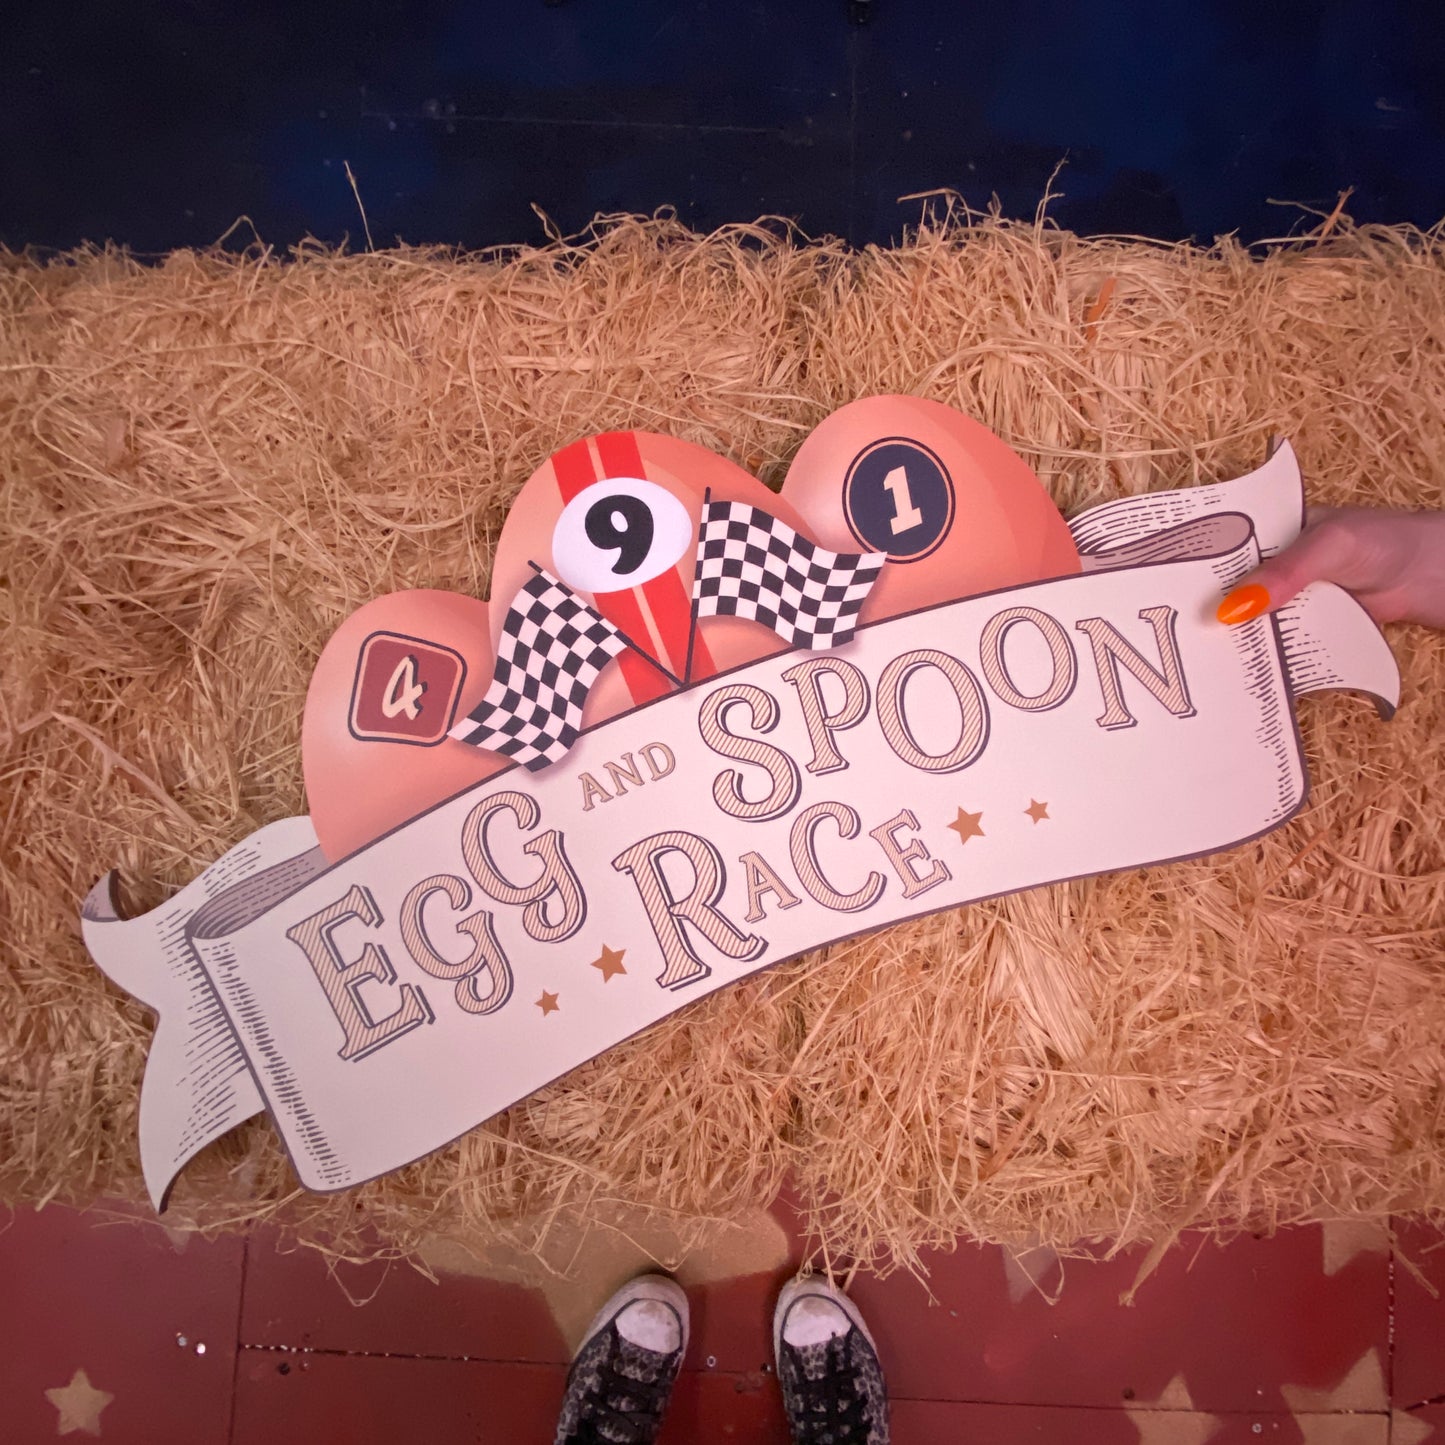 Egg and Spoon Race Sign